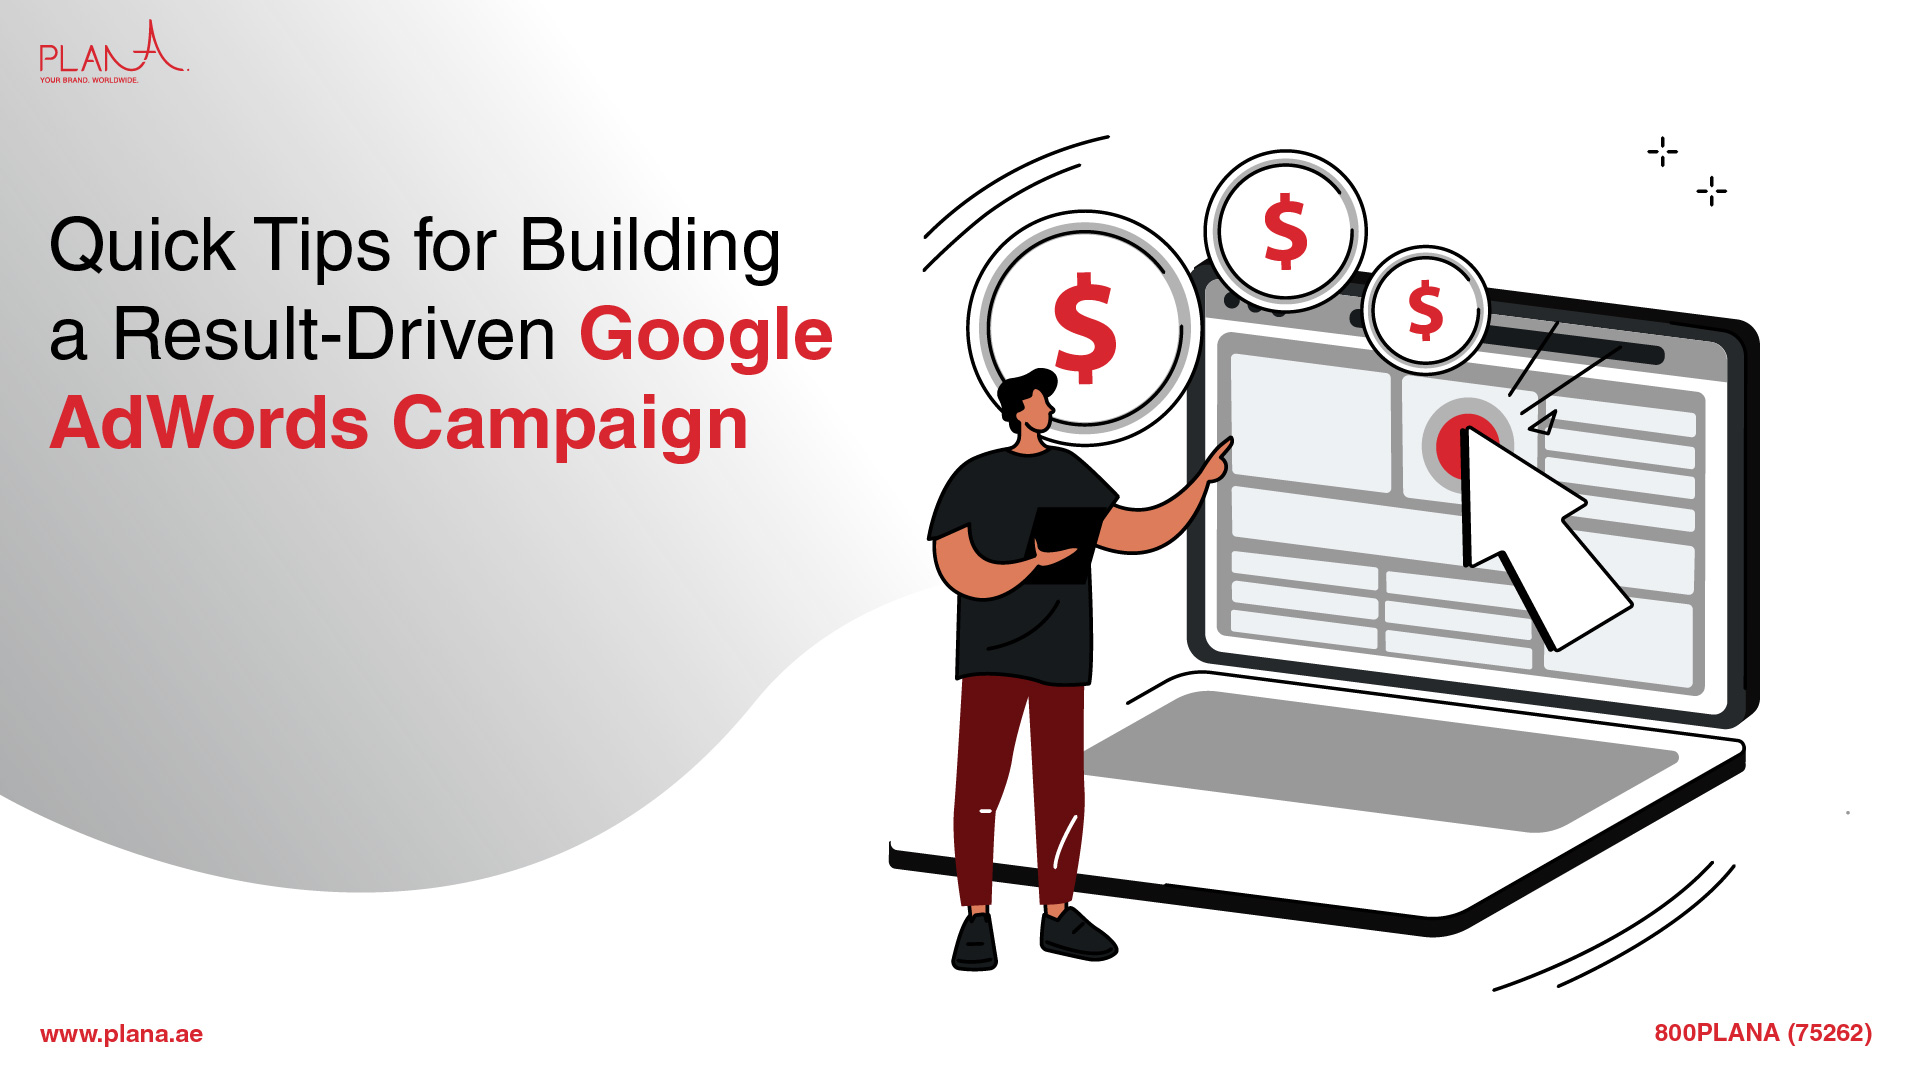 Quick Tips for Building a Result-Driven Google AdWords Campaign